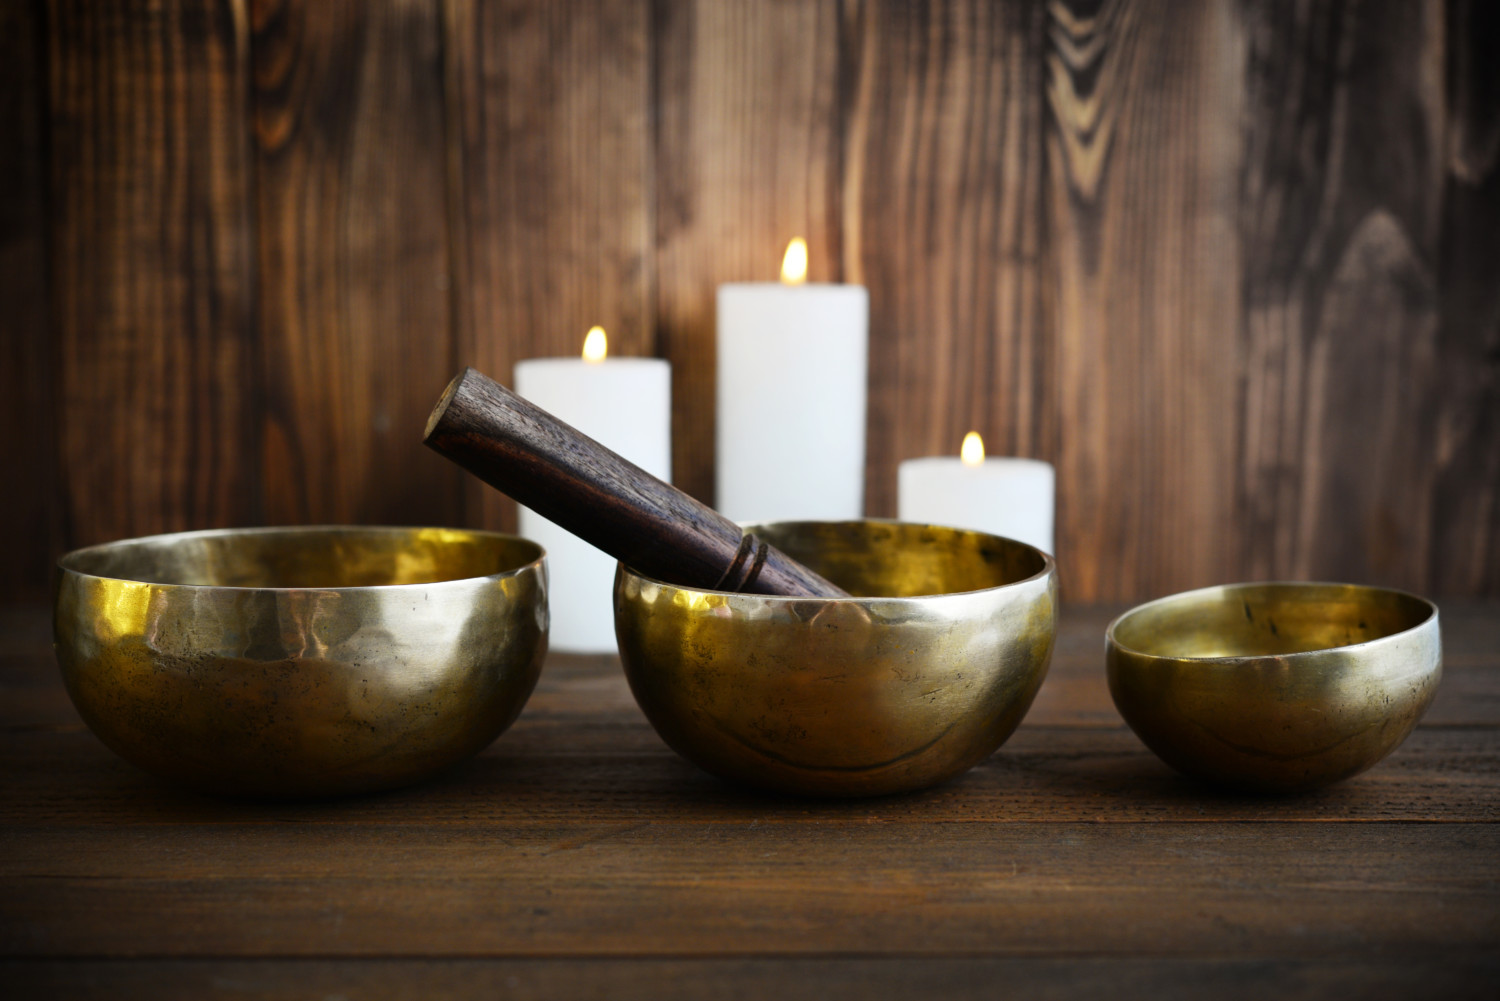 What is Sound Healing?